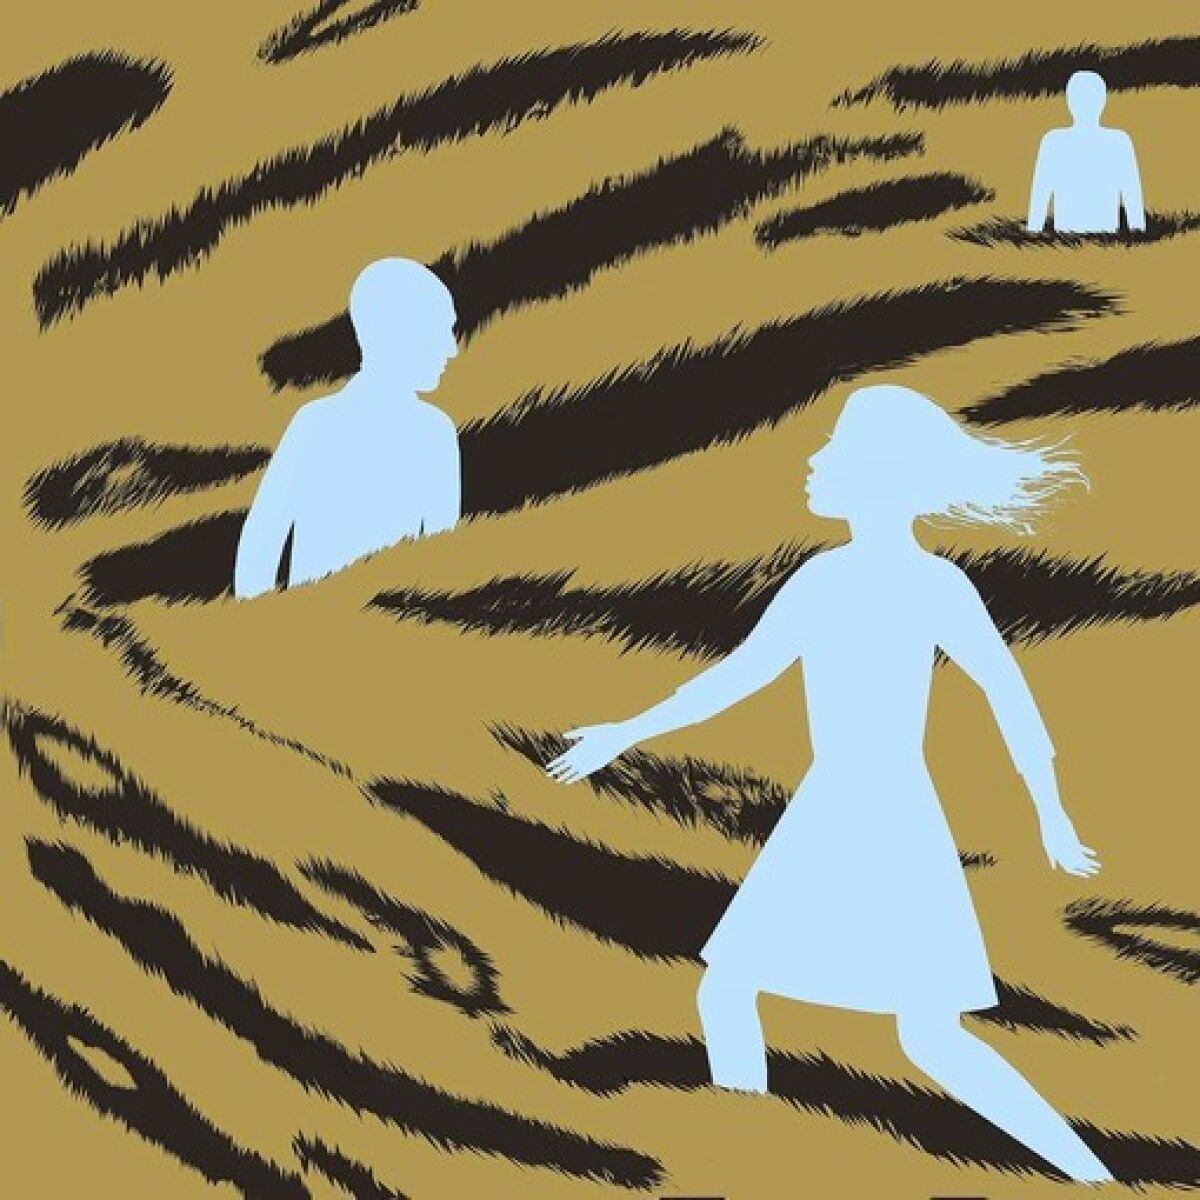 Illustration for David Ulin's review of Tea Obreht's new novel, "The Tiger's Wife."